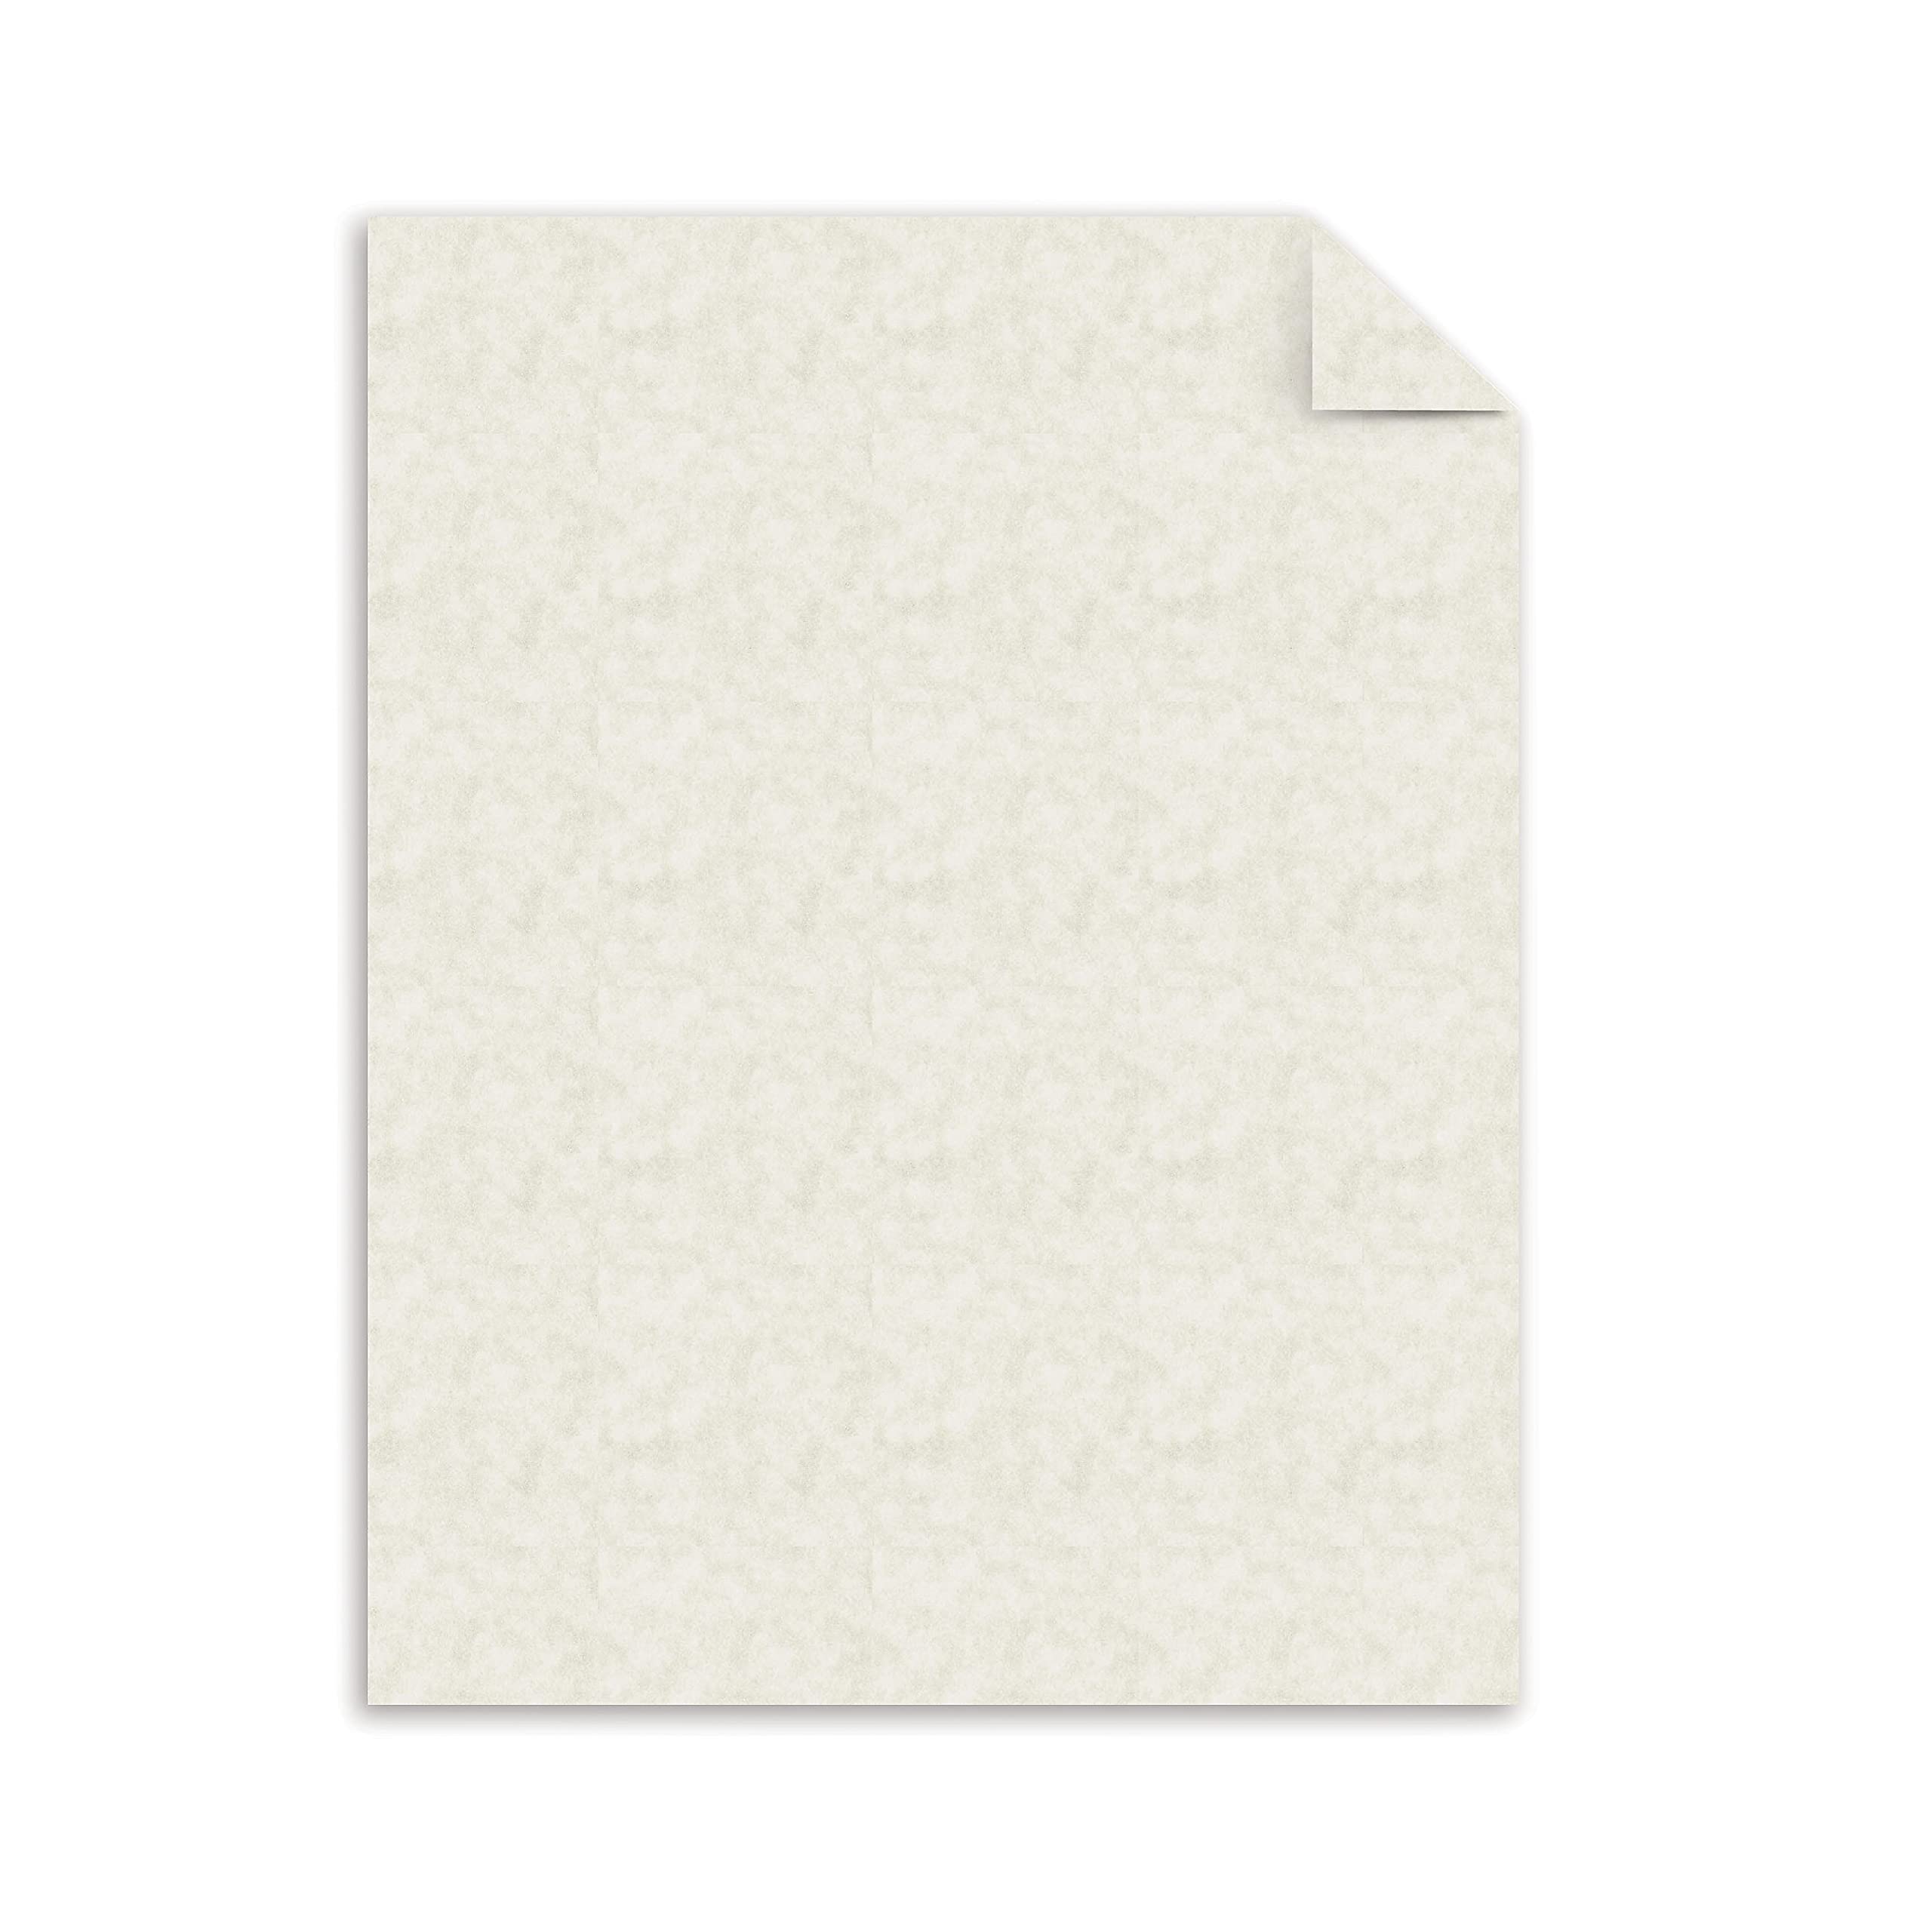 Southworth Parchment Cardstock, 8.5” x 11”, 65 lb/176 gsm, Ivory, 100 Sheets - Packaging May Vary (Z980CK)